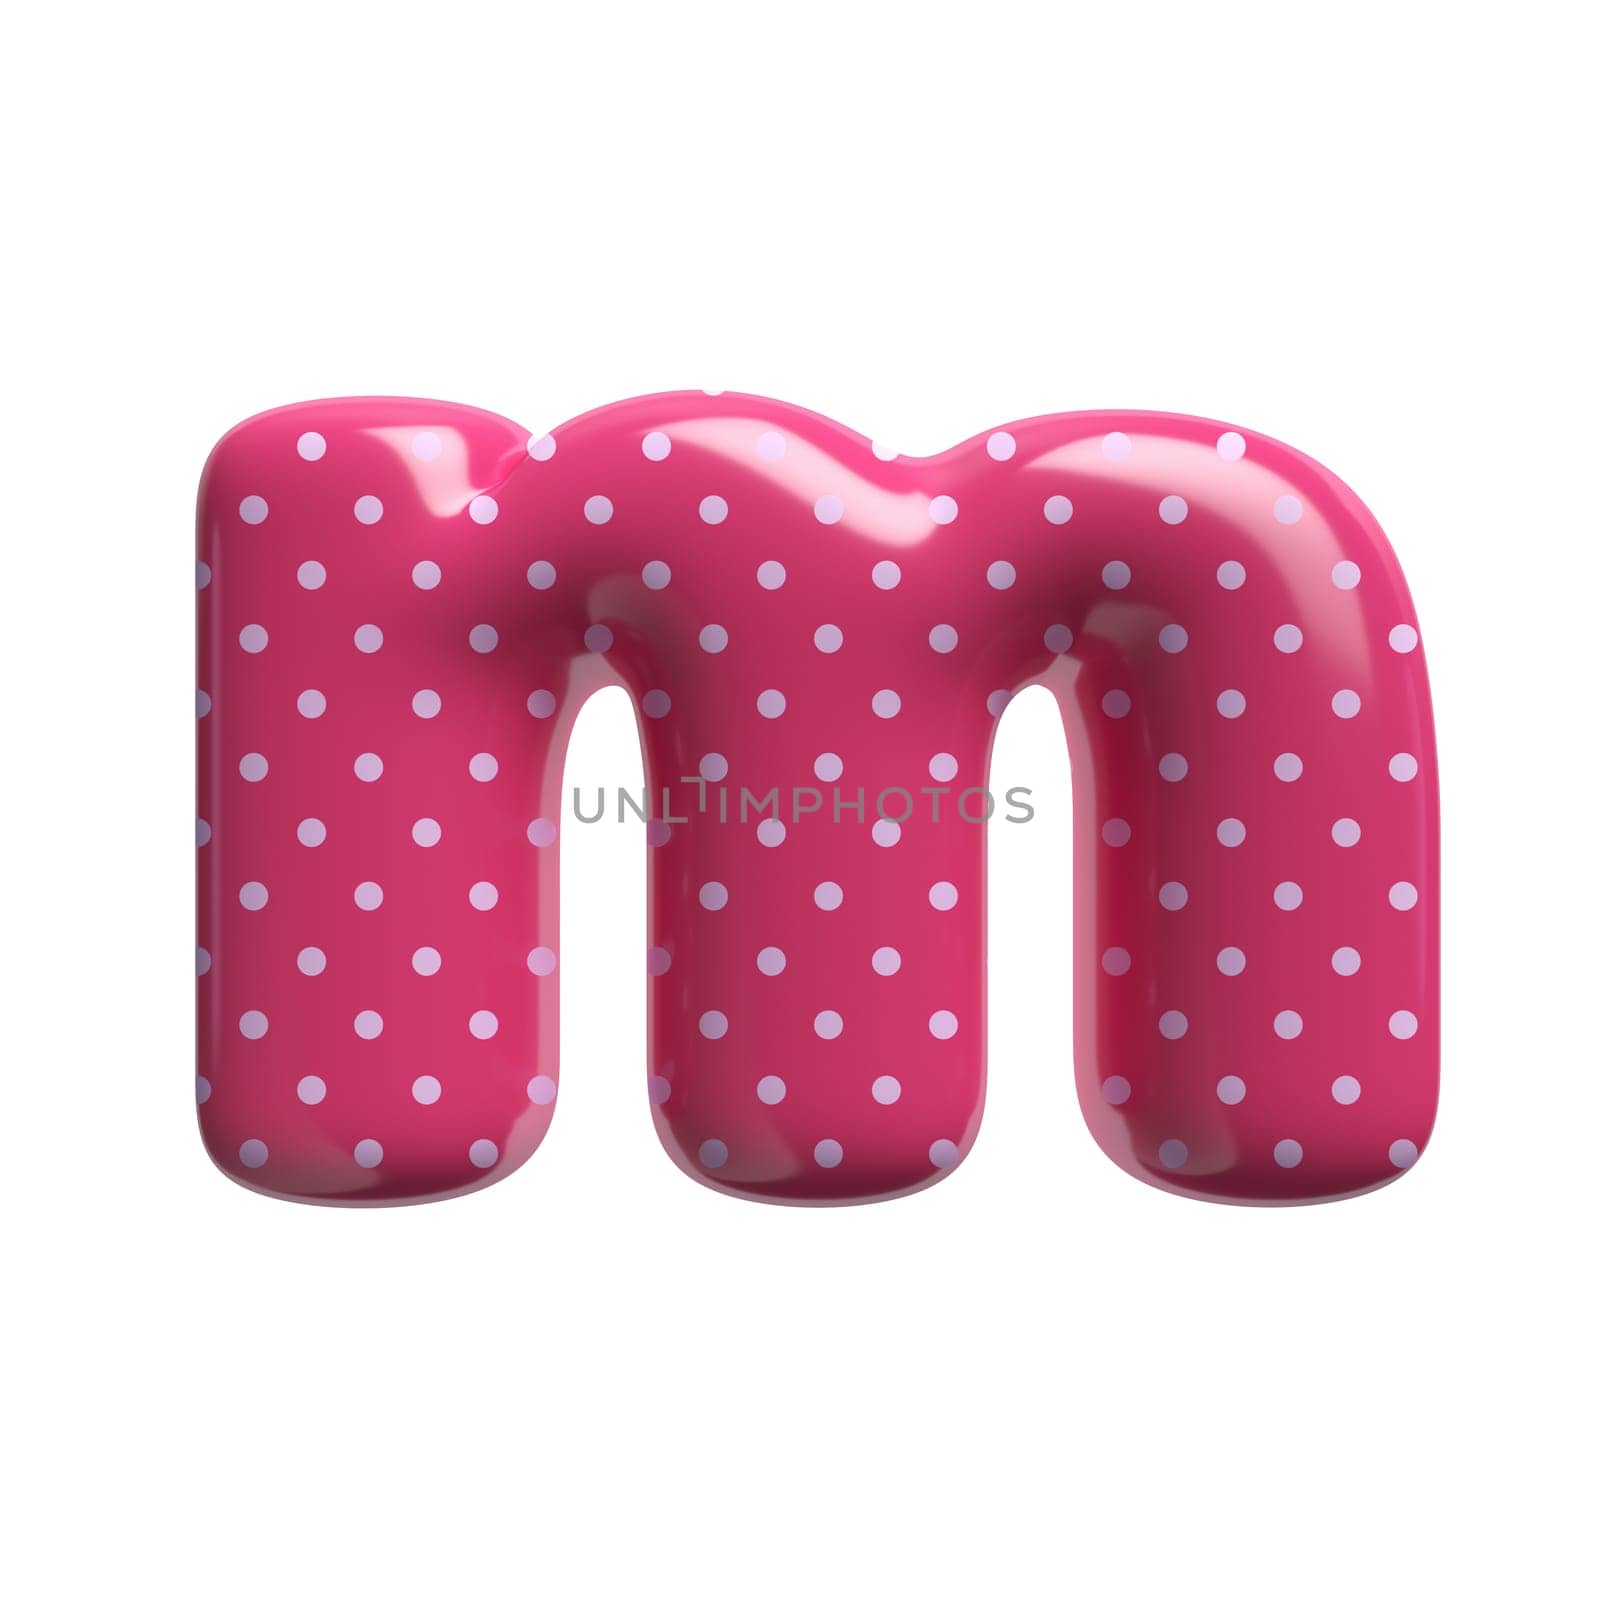 Polka dot letter M - Lowercase 3d pink retro font - Suitable for Fashion, retro design or decoration related subjects by chrisroll